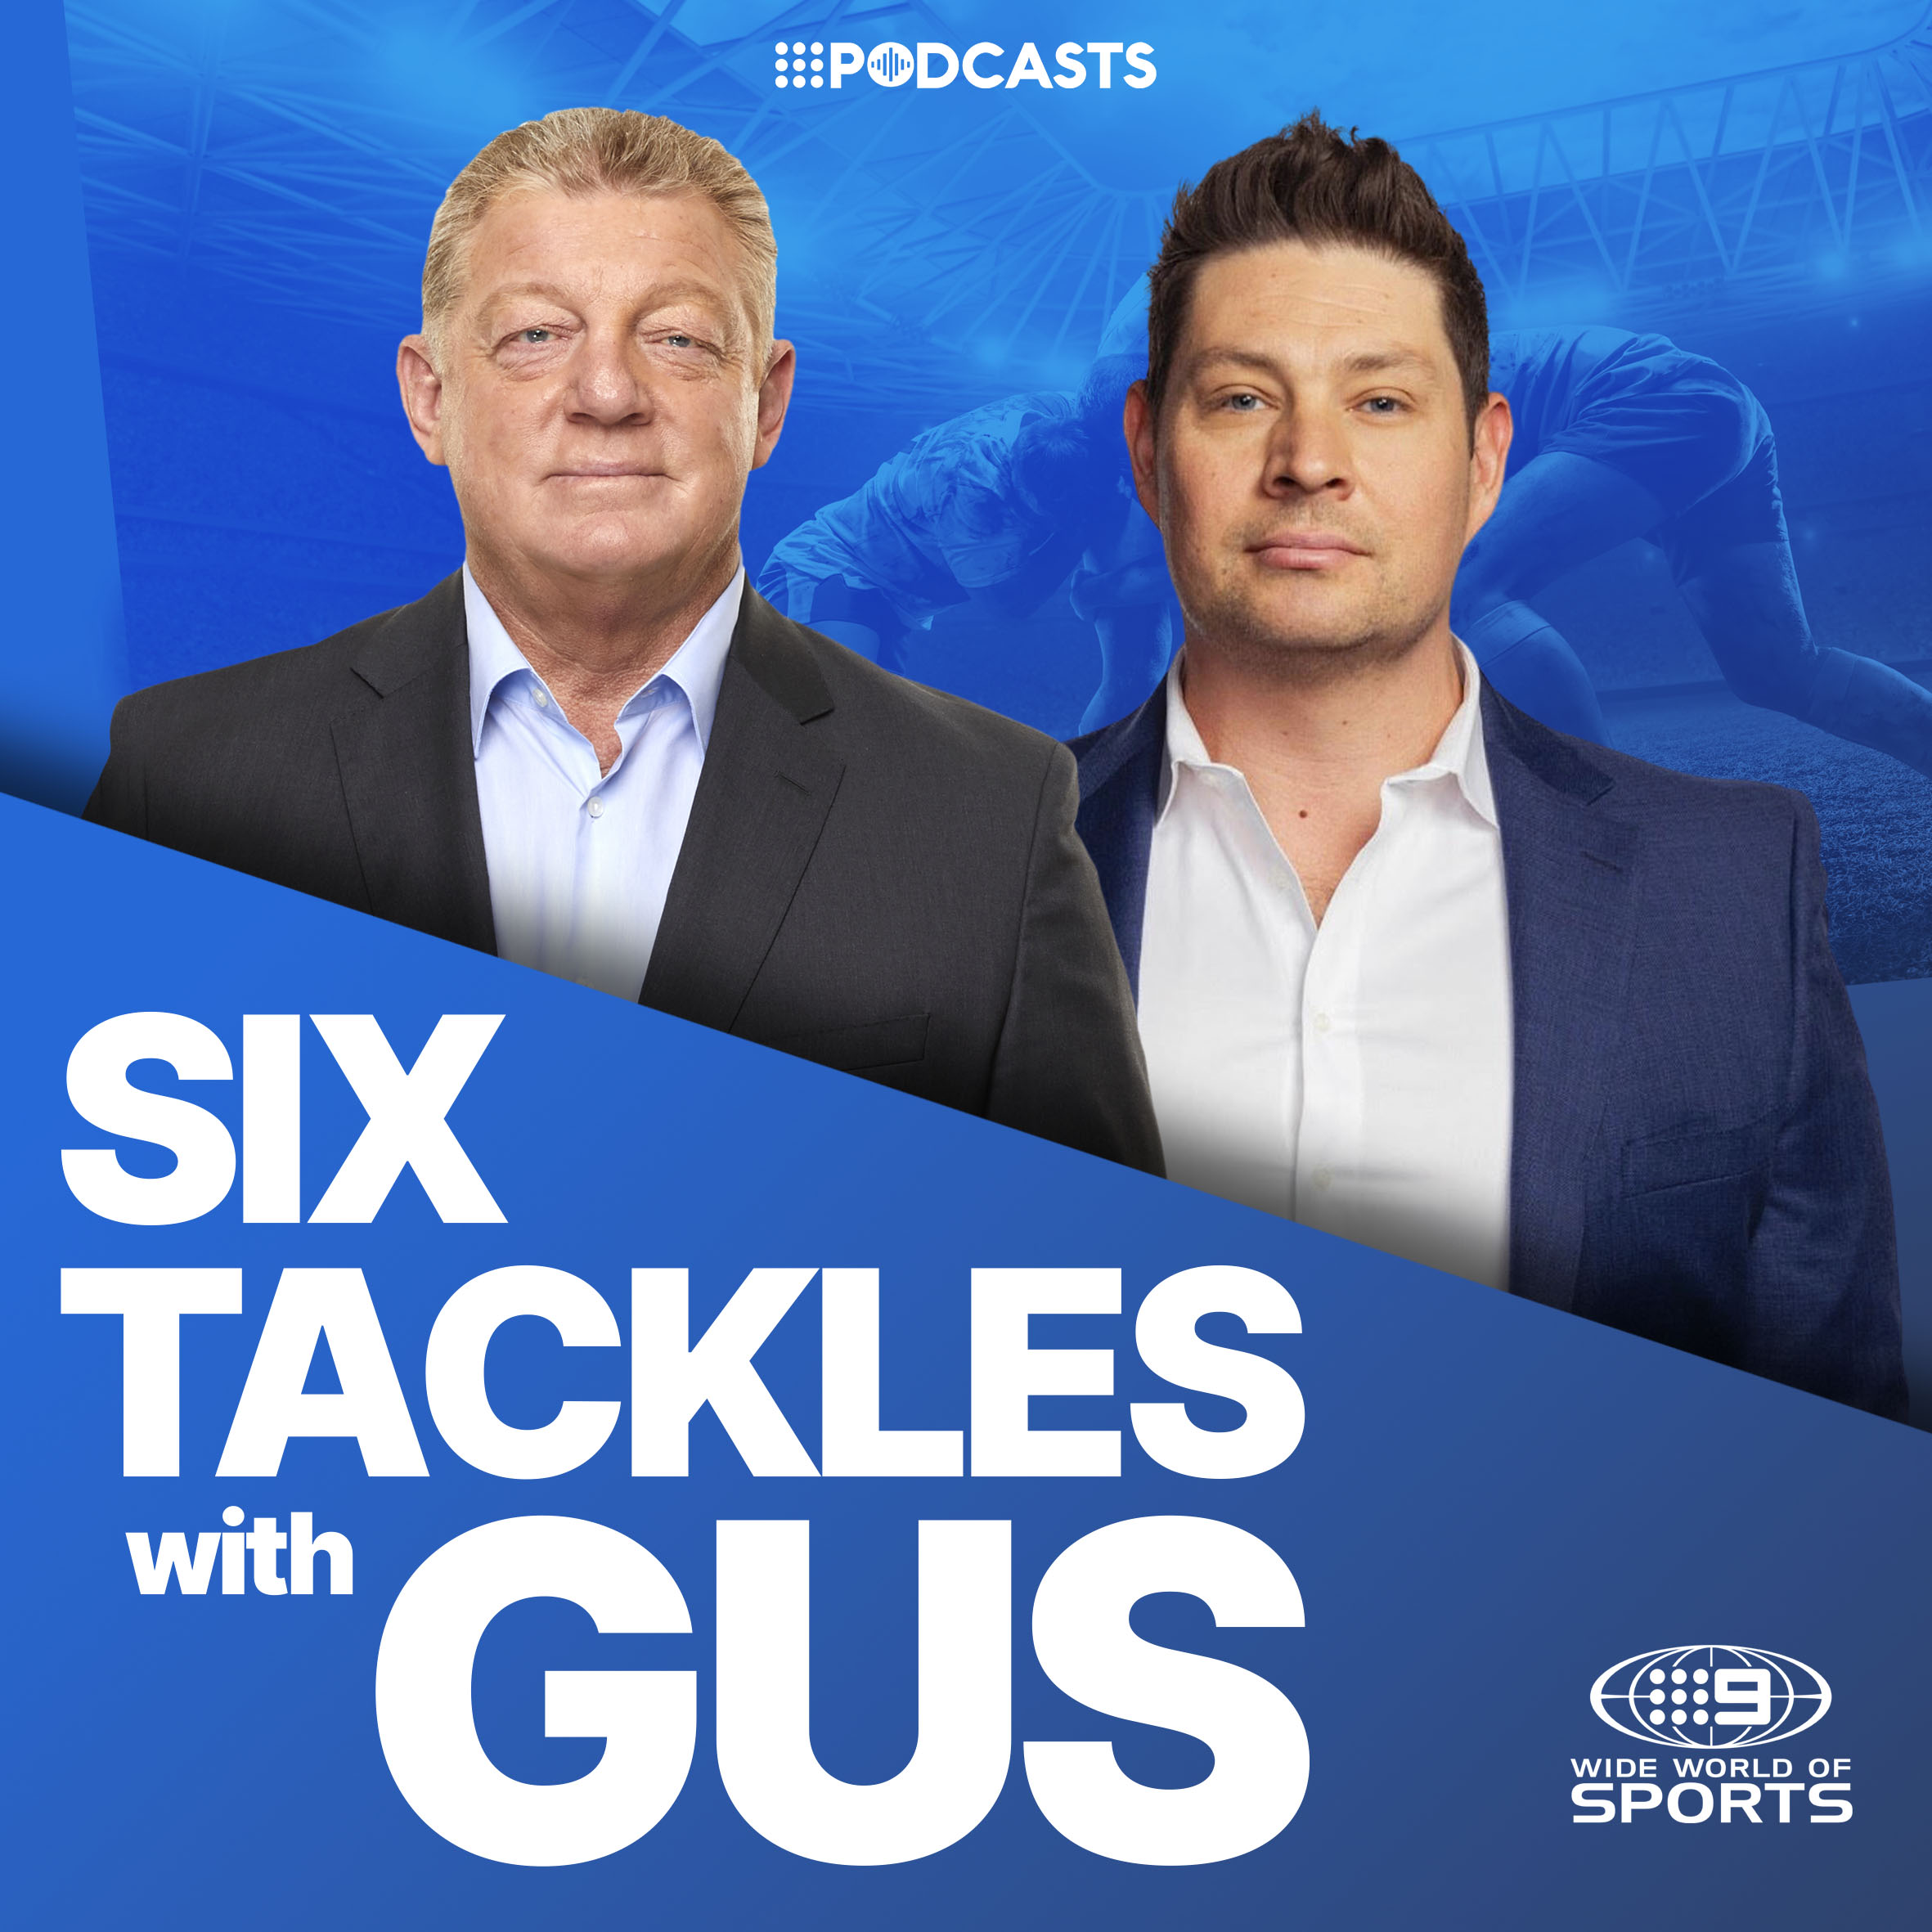 The Blues halves pairing Gus ‘trusts’ for game one